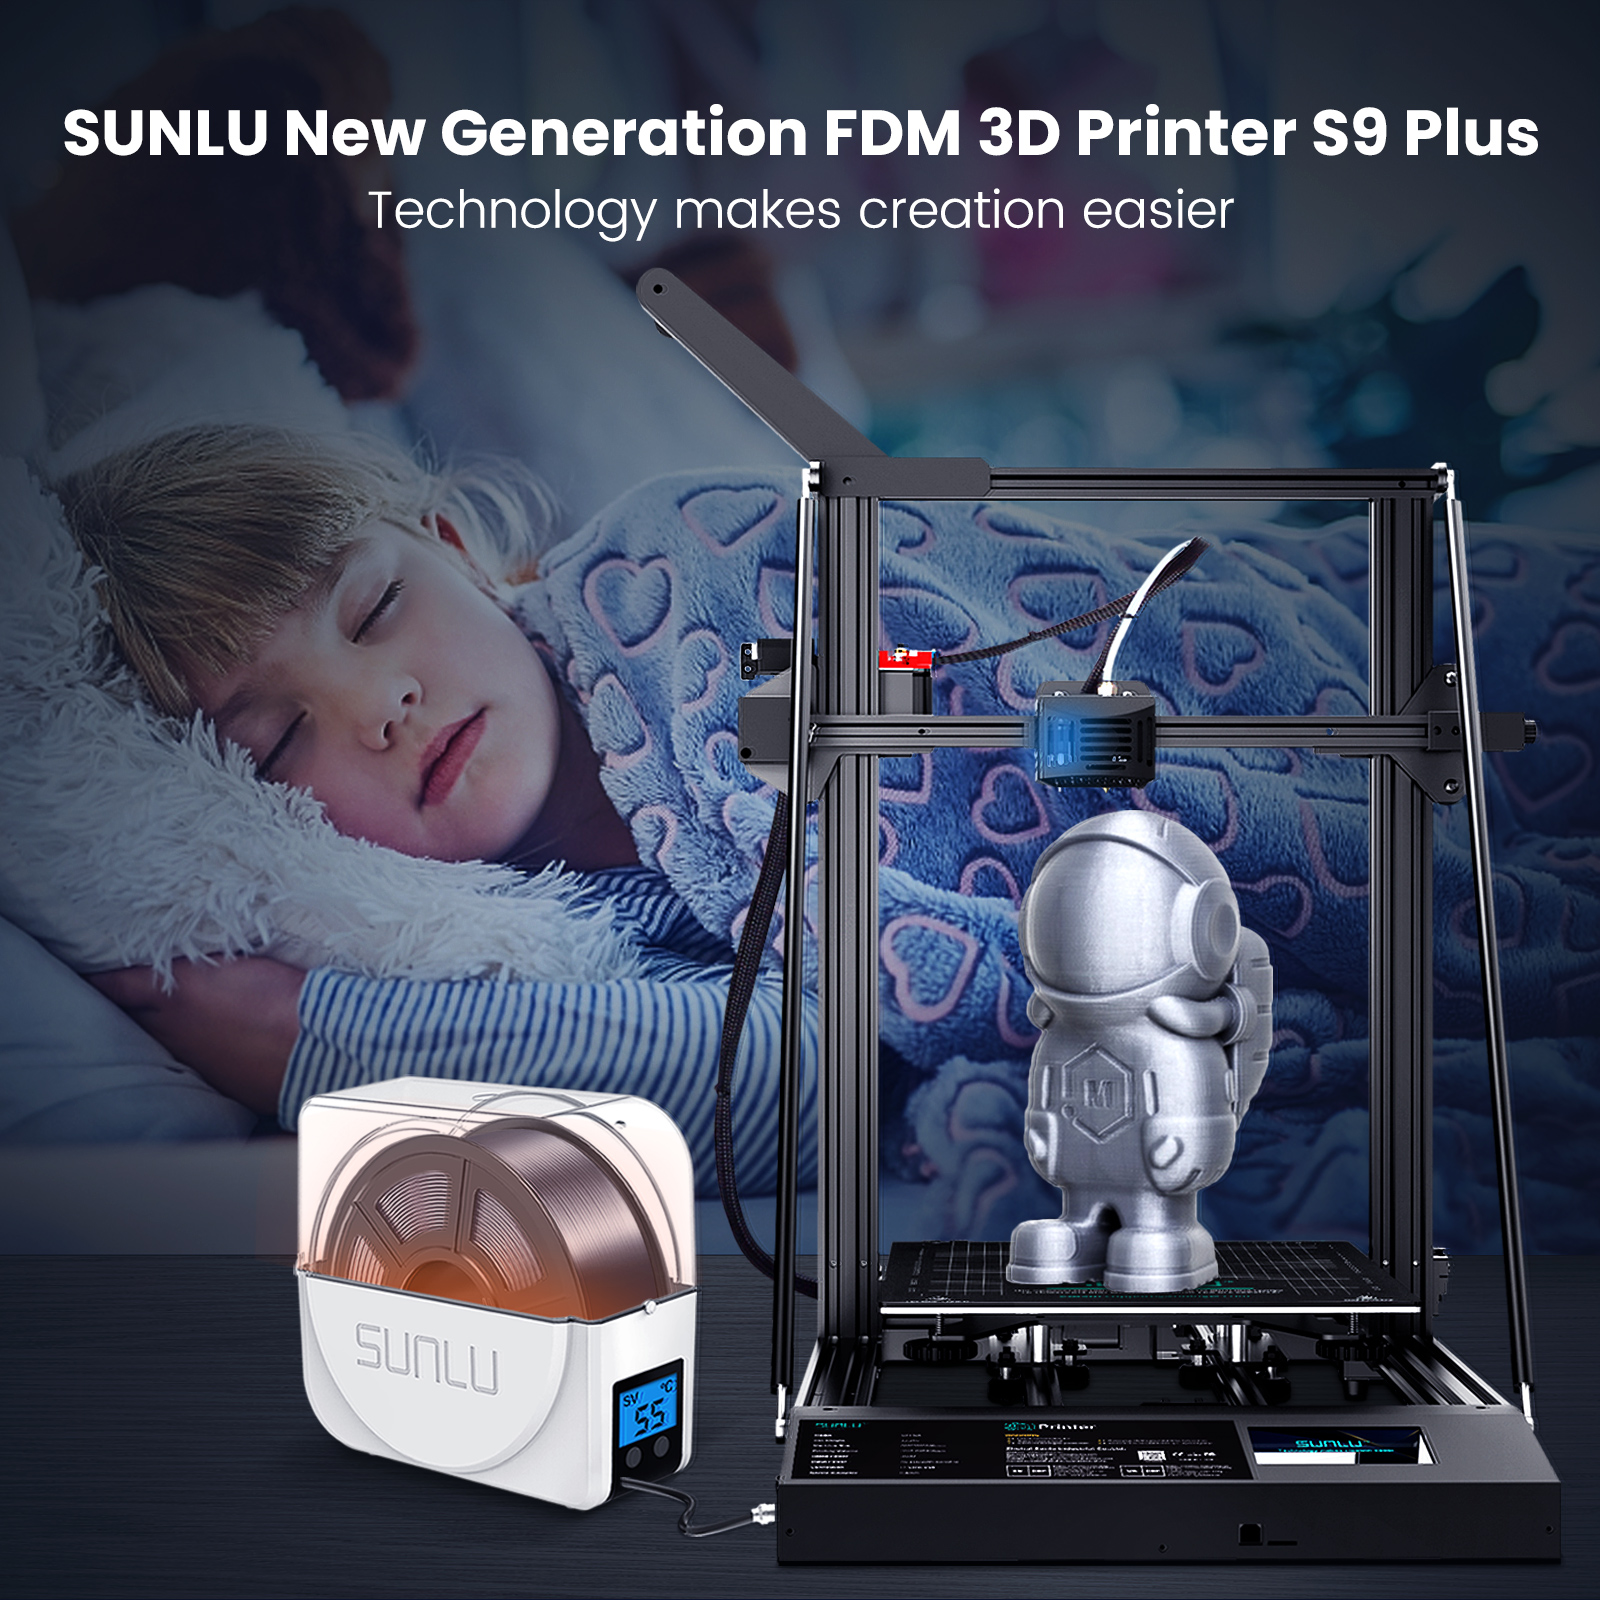 Sunlu-S9-Plus-Large-Size-FDM-3D-Printer-with-FilaDryer-S1-up-to-310310400mm-Printing-Size-Auto-level-1973496-1